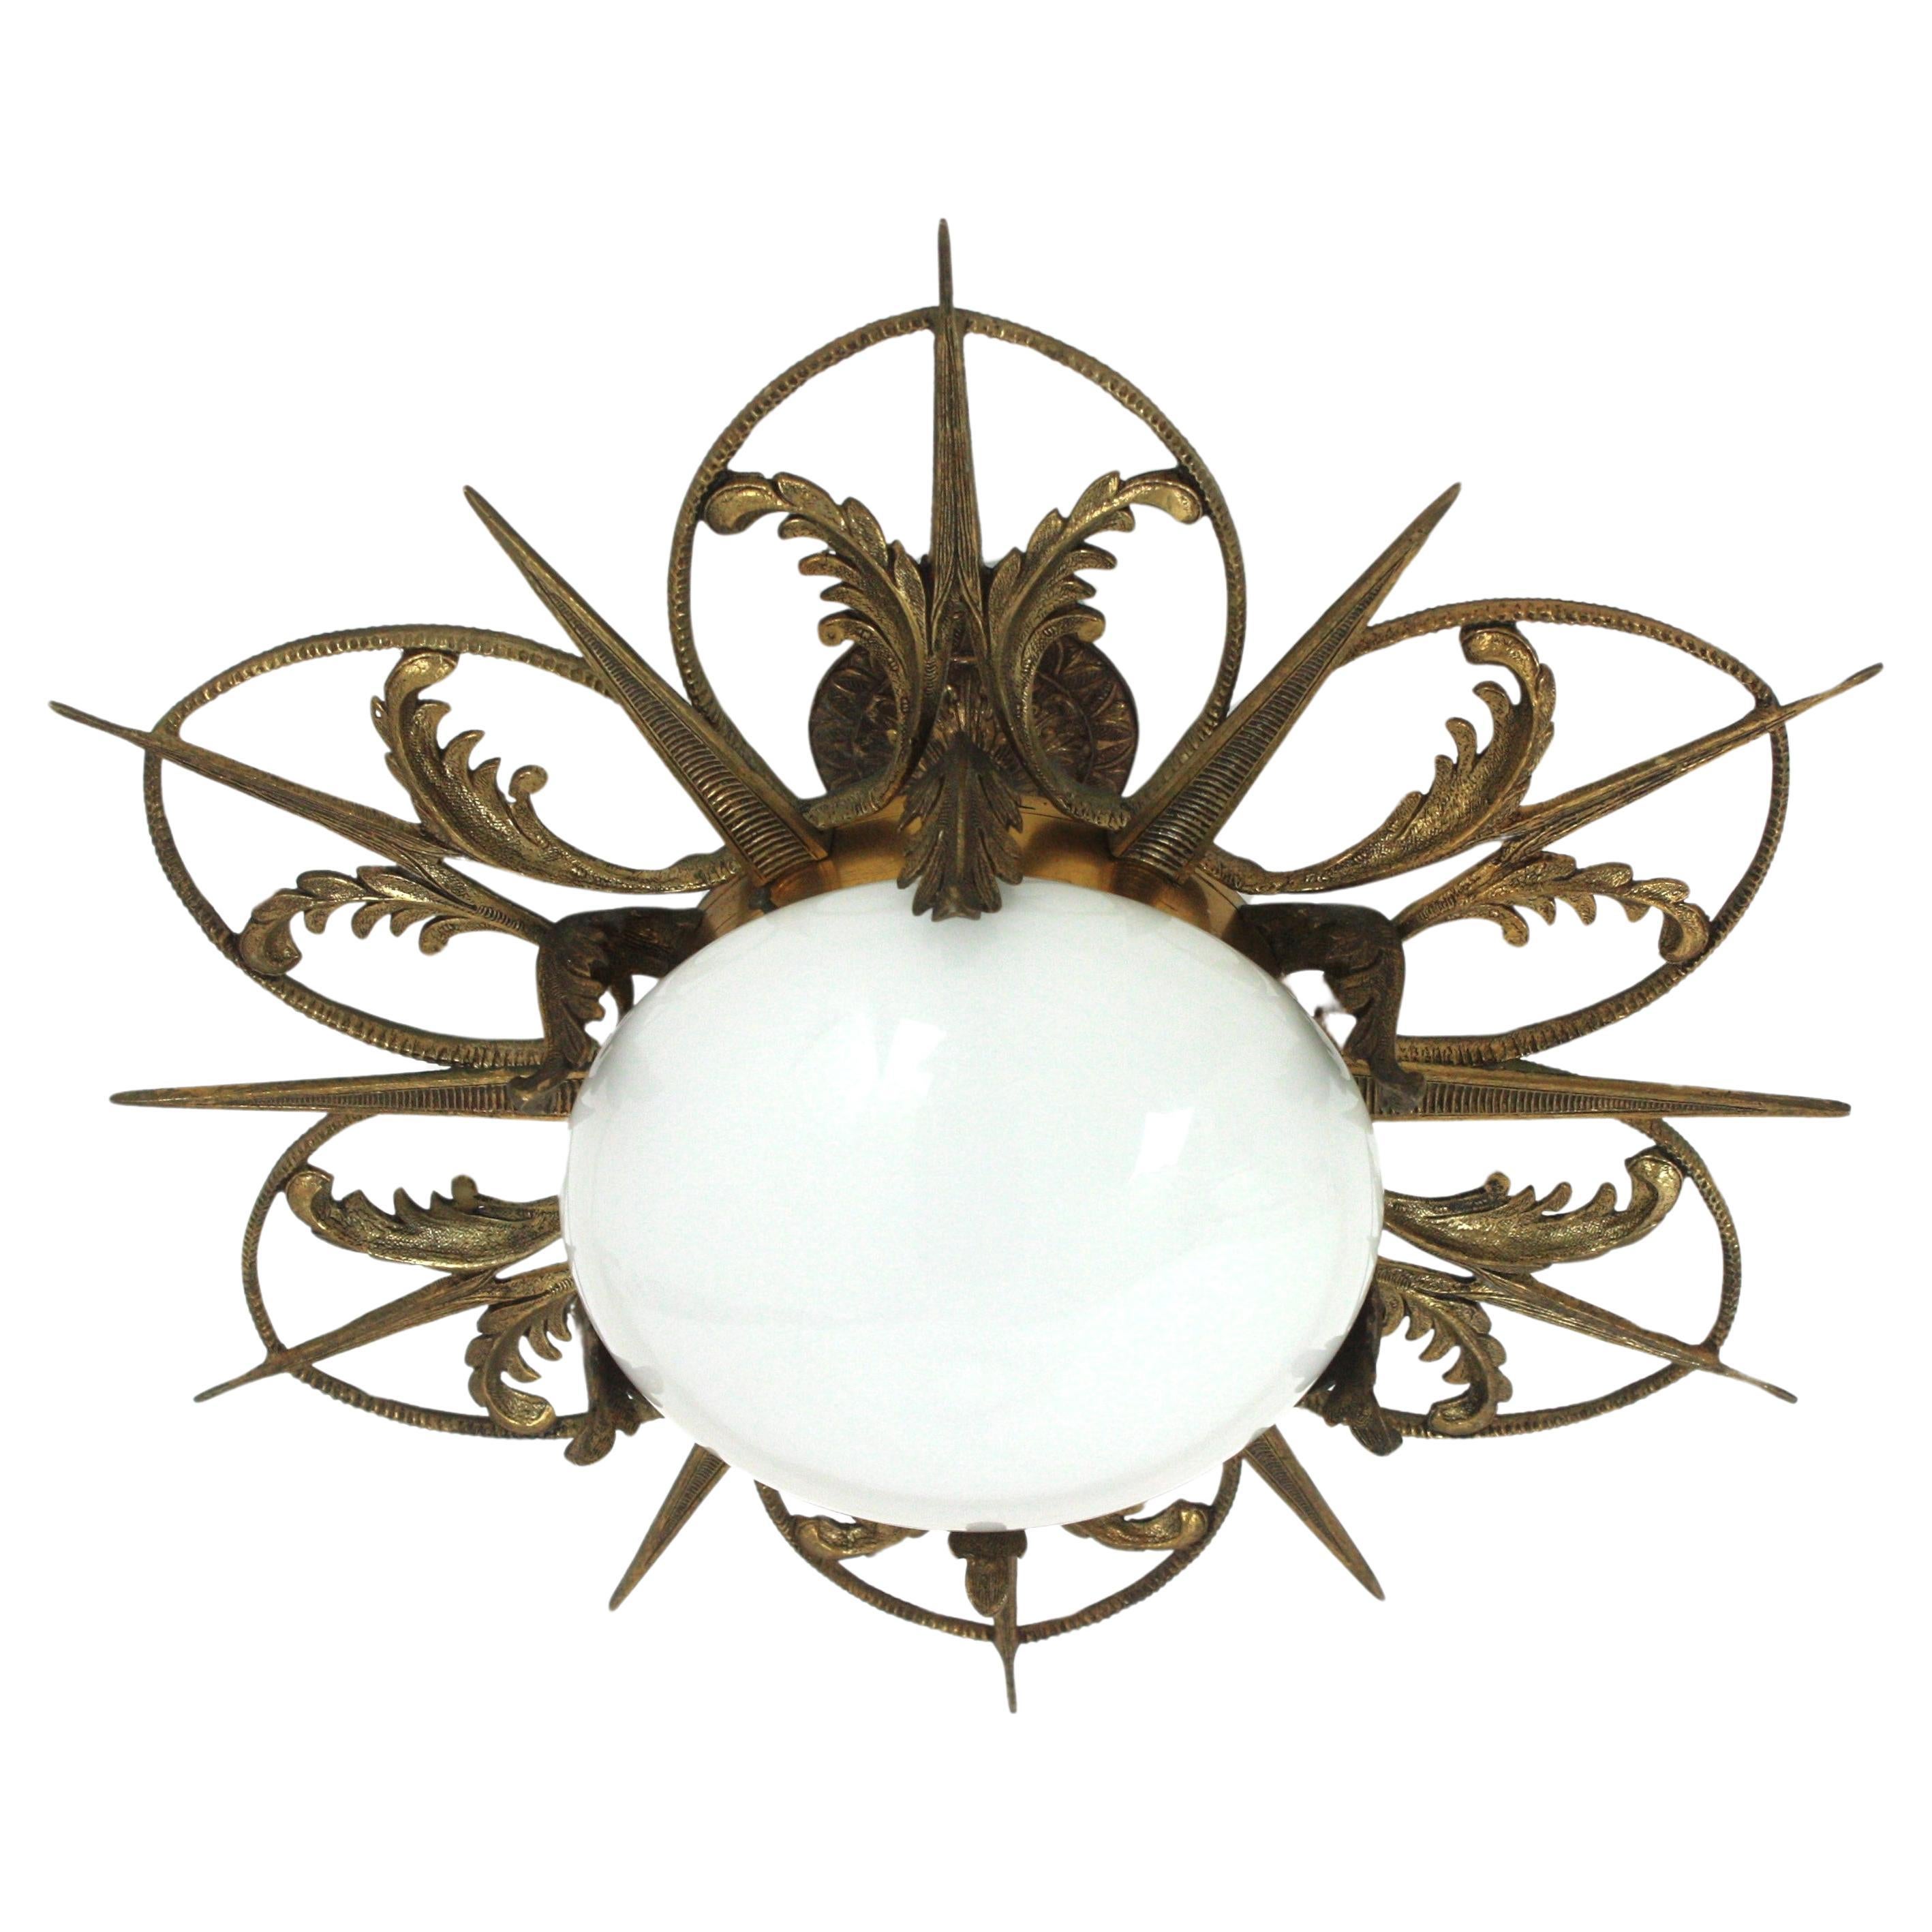 Exquisite Art Deco flower or sunburst ceiling lamp, Engraved and Molded bronze, Milk Glass. France, 1930s.
This flush mount features a flower burst or sunburst with alternating rays and petals and foliage motifs thorough. At the central part an